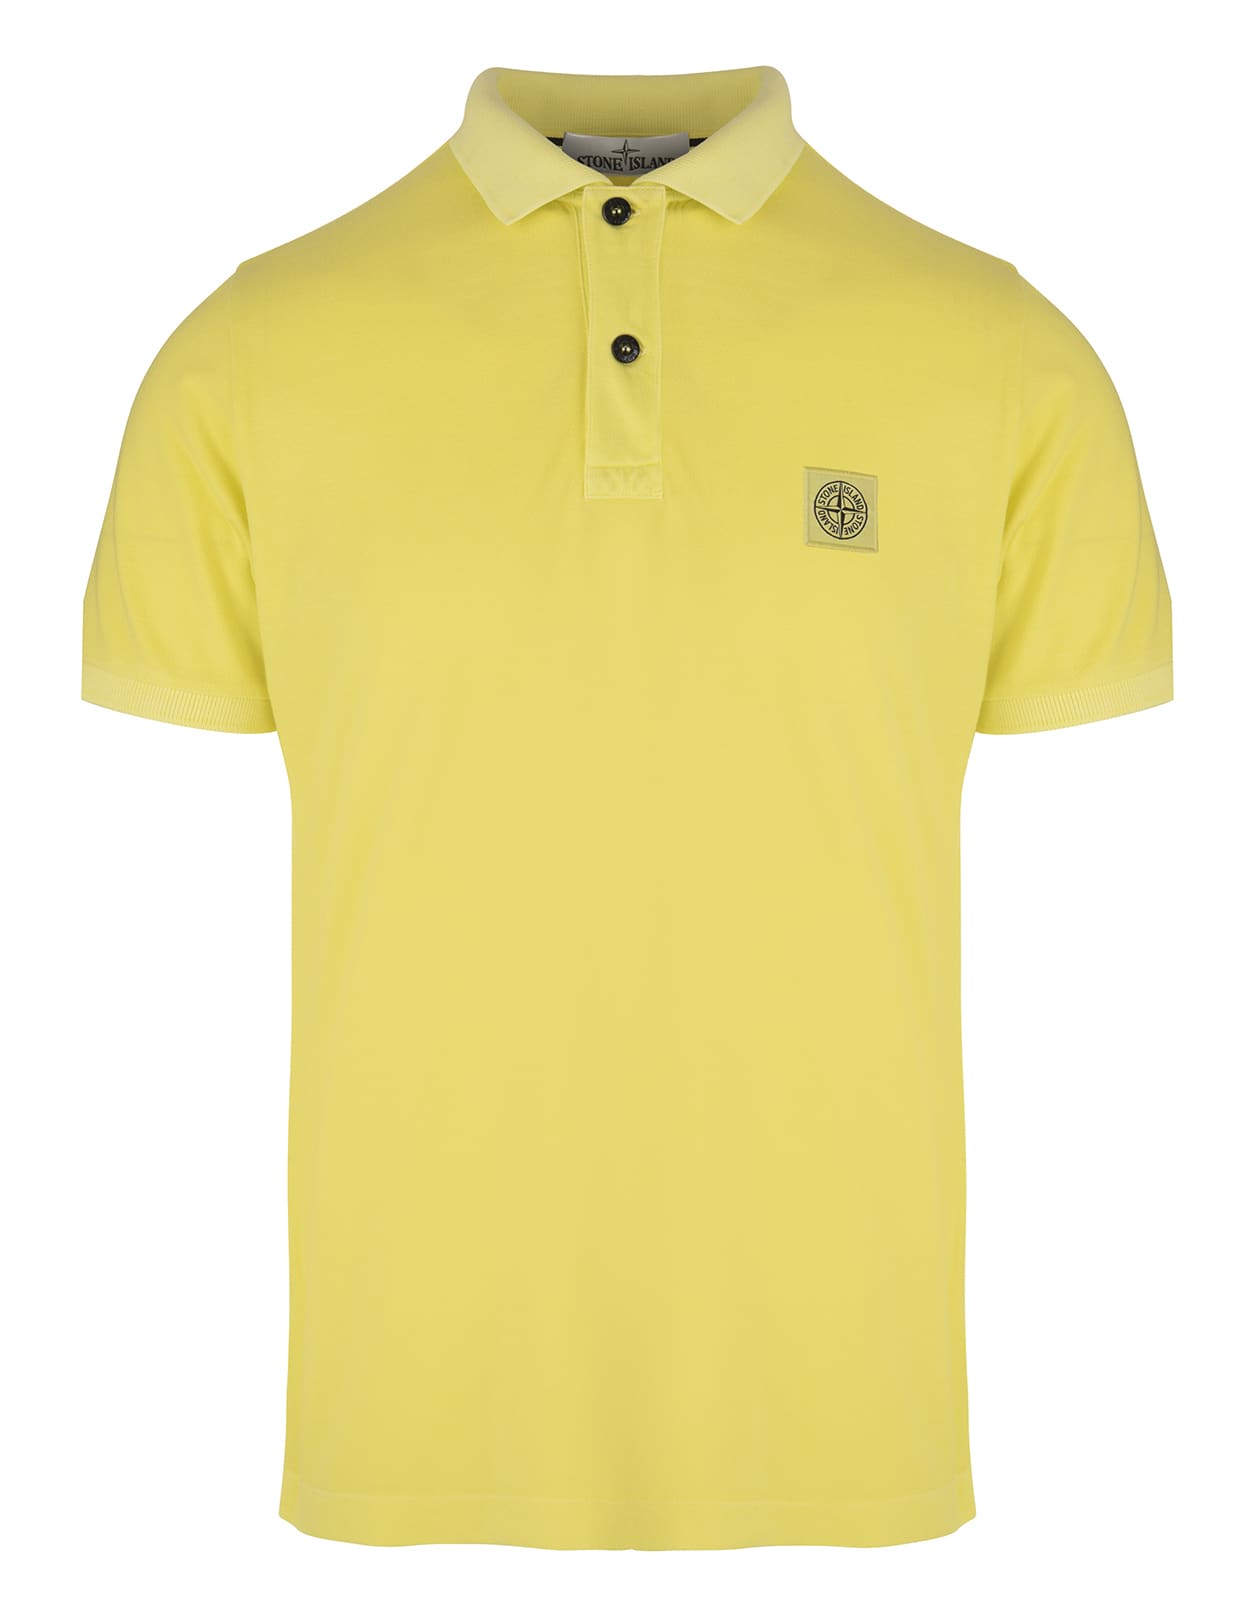 Man Polo Shirt In Yellow Cotton Piquet With Stone Island Compass Rose Patch